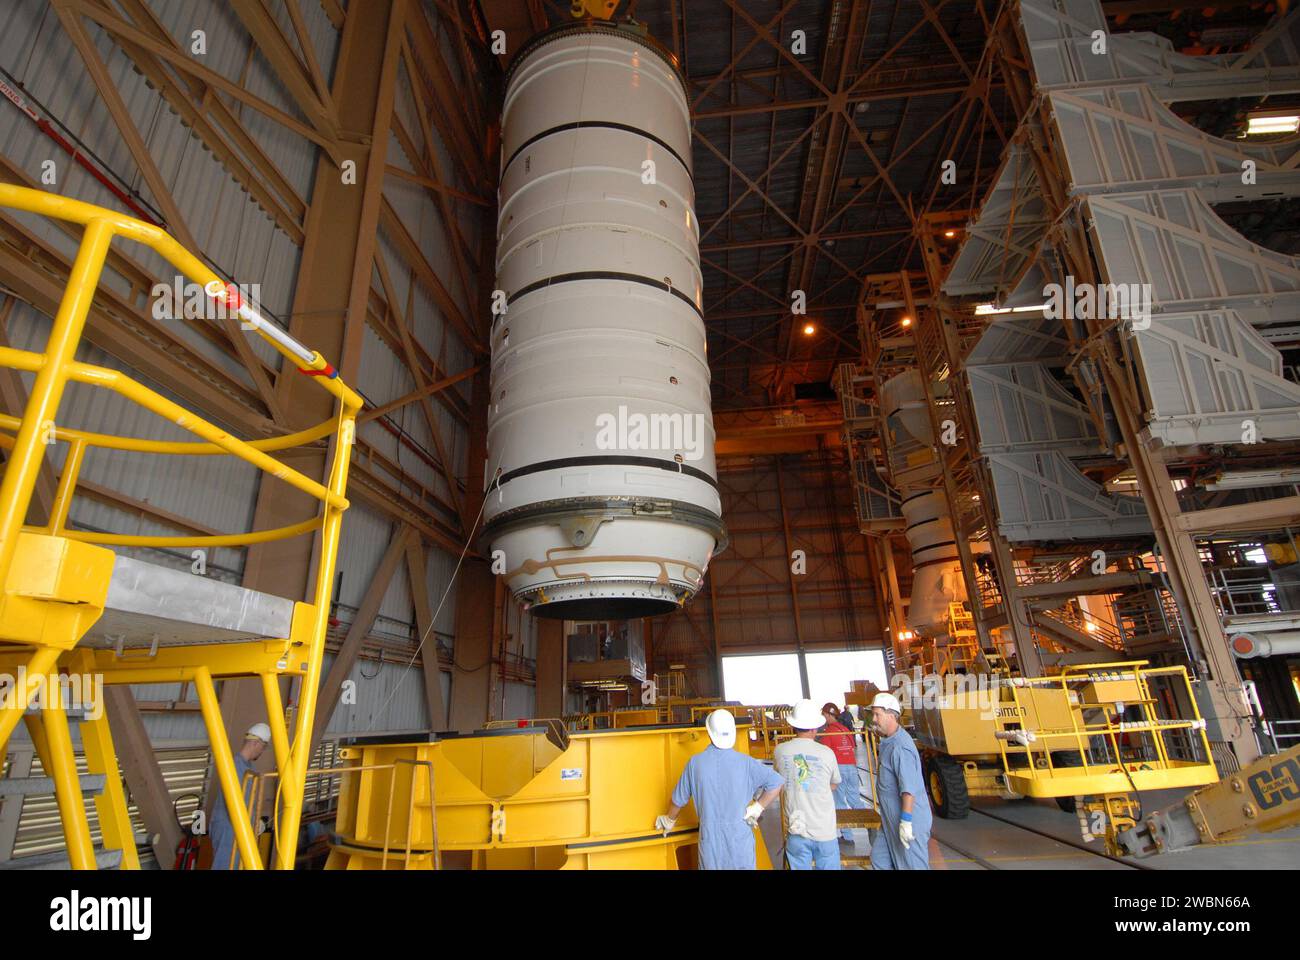 CAPE CANAVERAL, Fla. –  Technicians stand by as the Ares I-X motor segment is moved toward a work stand in the Rotation, Processing and Surge Facility at NASA's Kennedy Space Center in Florida. Four segments were delivered to Kennedy for final processing and integration. The booster used for the Ares I-X launch is being modified by adding new forward structures and a fifth segment simulator. The motor is the final hardware needed for the rocket's upcoming test flight this summer. The stacking operations are scheduled to begin in the Vehicle Assembly Building in April. Stock Photo